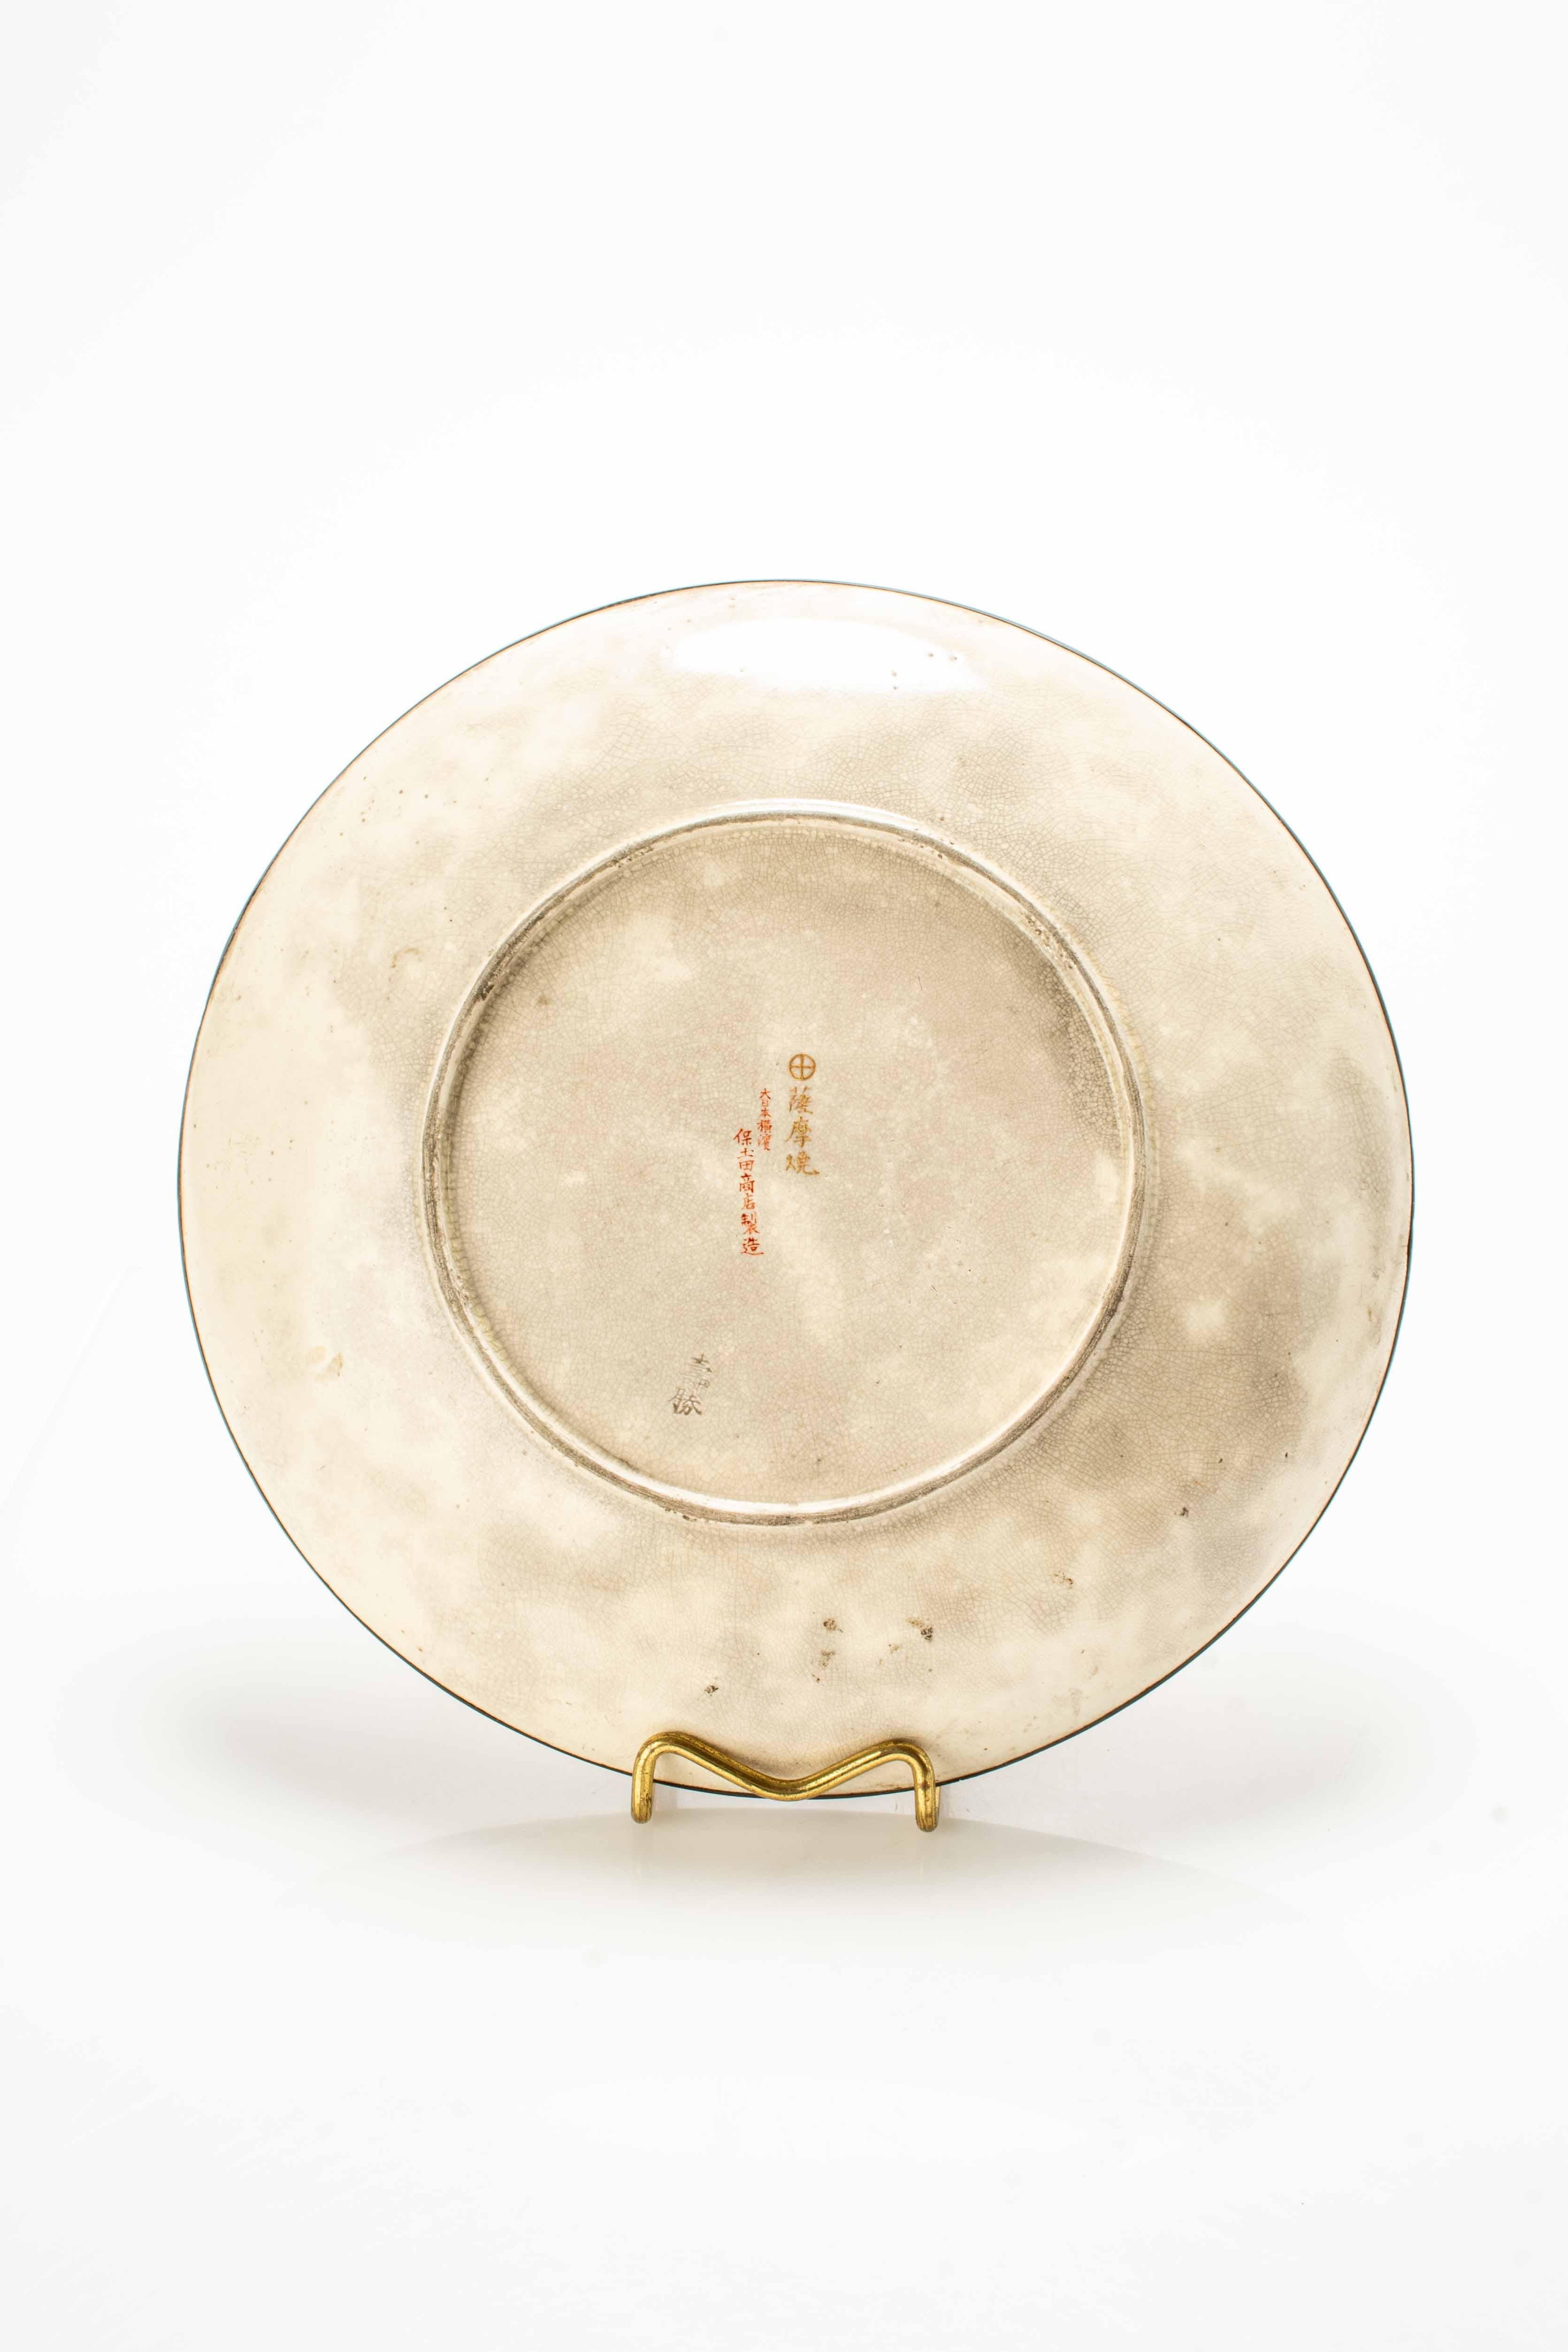 19th Century Satsuma ceramic plate adorned with polychrome and gold decorations For Sale